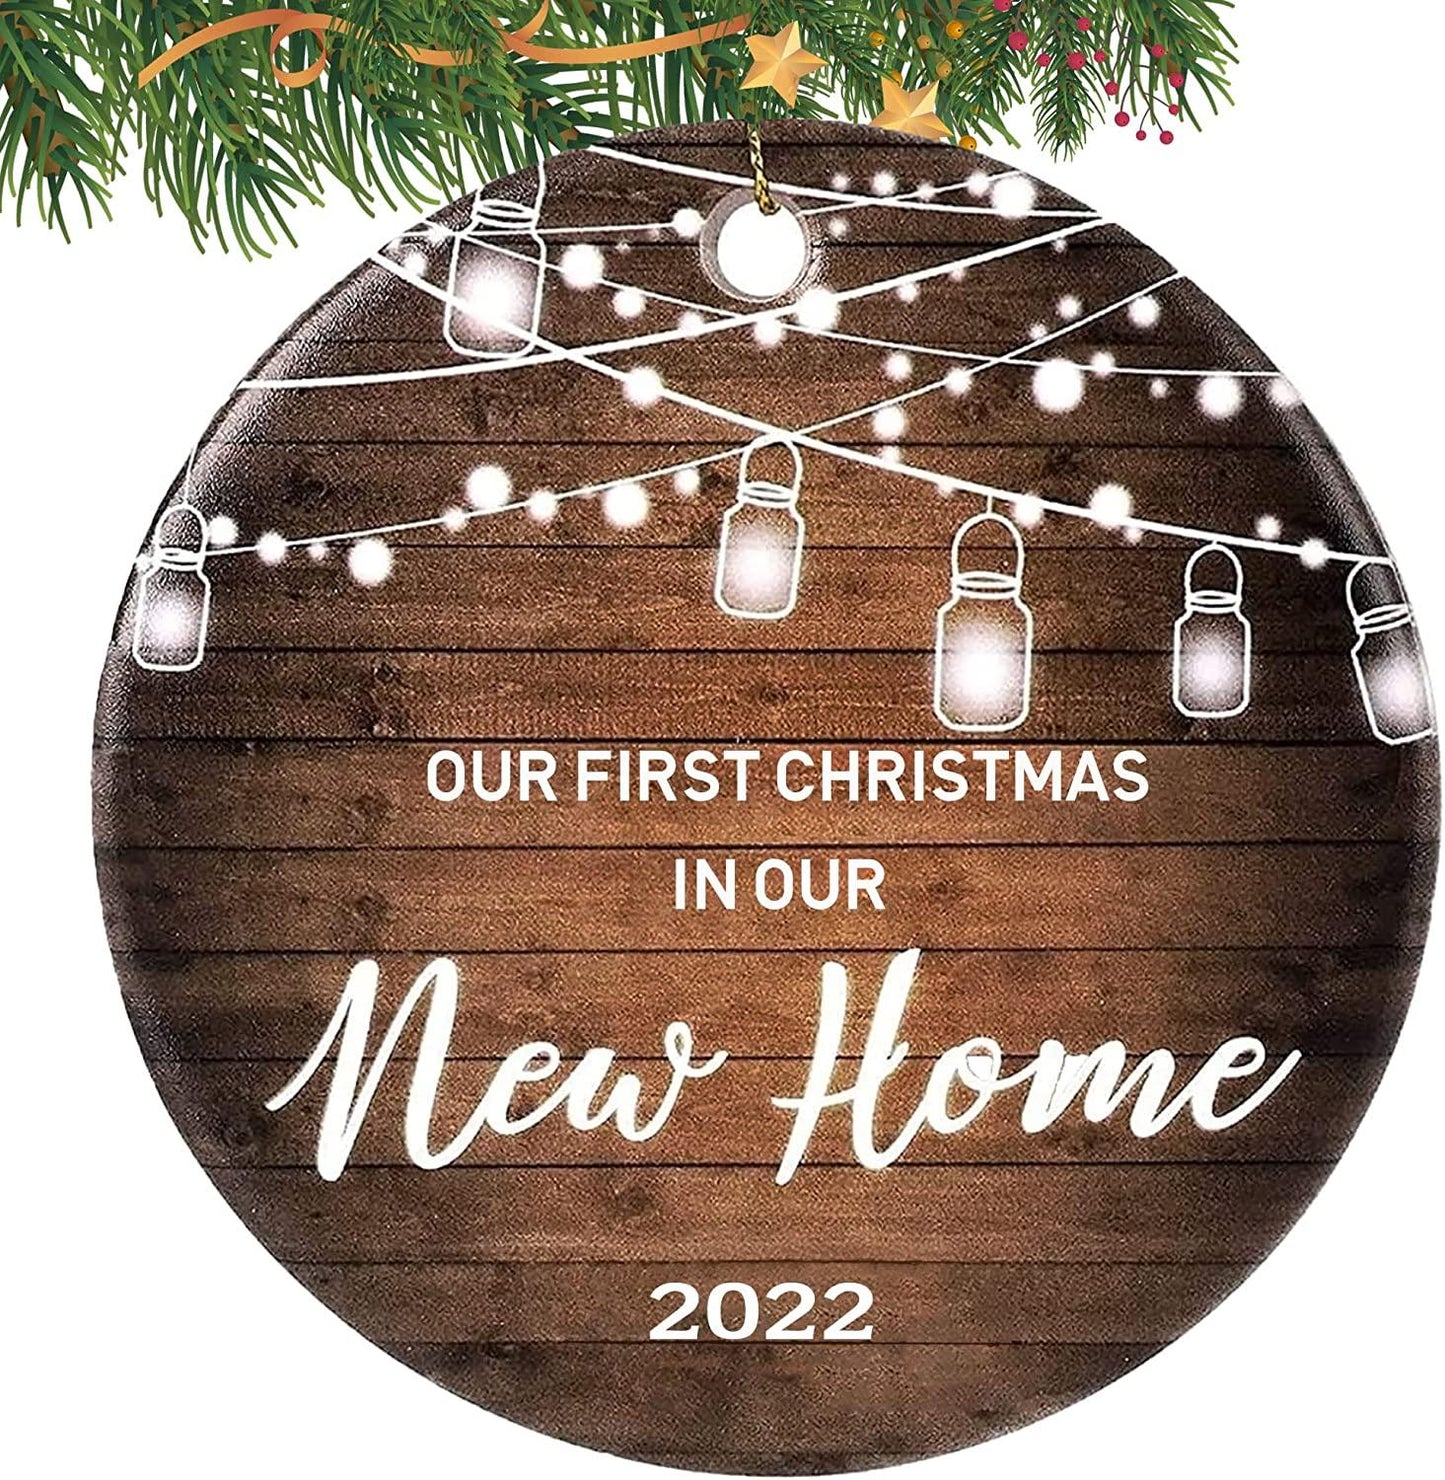 2022 Our First Christmas as Mr. and Mrs. Ornament, First Christmas Married Ornaments, Wedding Gifts for Couple, Christmas Tree Ornaments - If you say i do